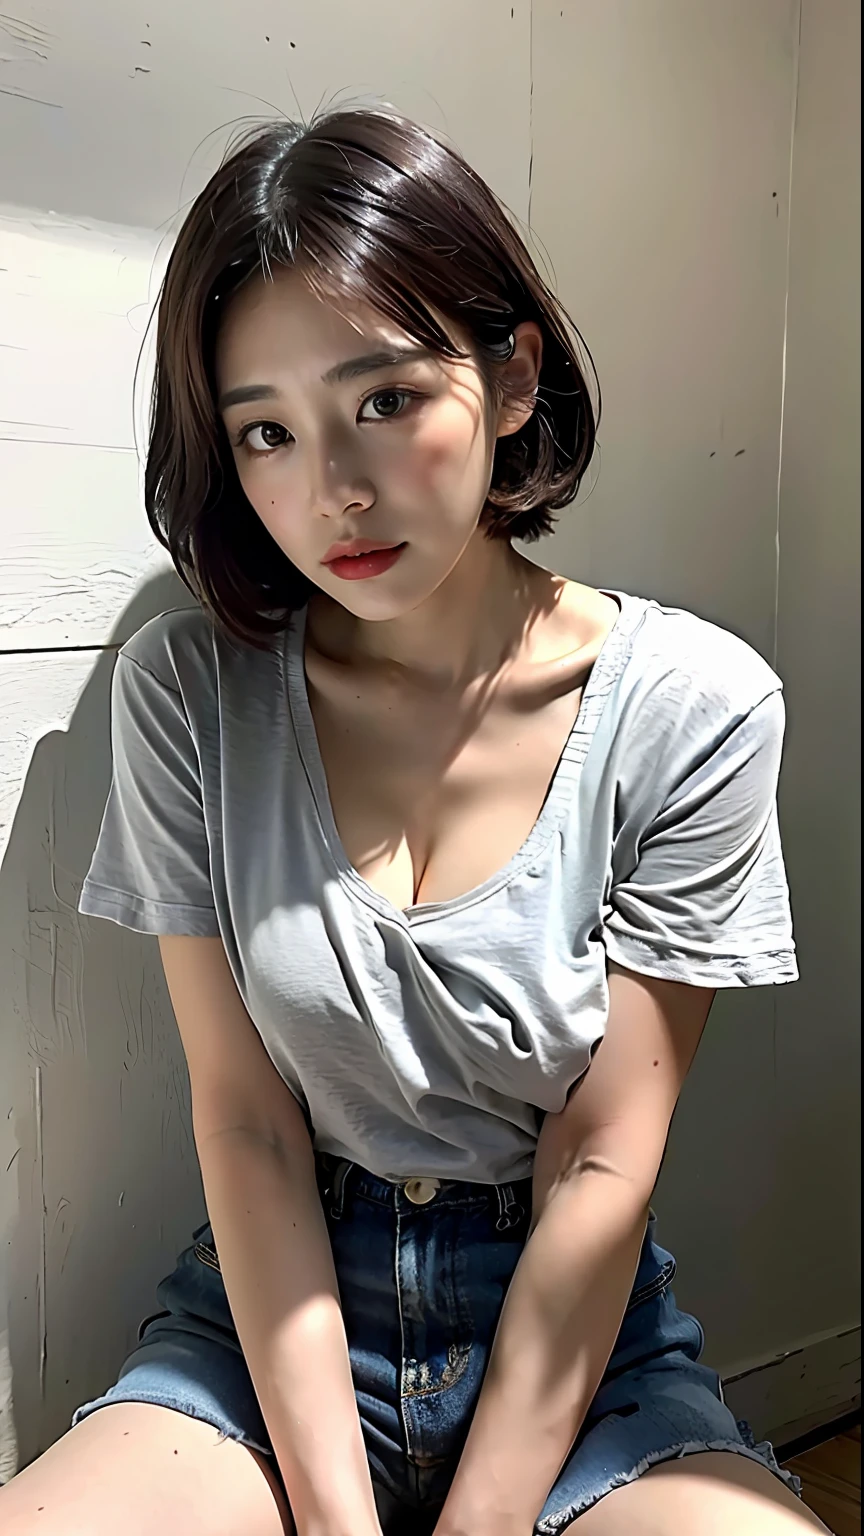 (top-quality、8K、32K、​masterpiece、nffsw:1.2)、Photo of a cute Japanese woman、Black short hair、beauitful face、(Slouched:1.5)、crouching down、(From  above:1.2)、(a closeup:1.4)、POV、Loose T-shirt with wide open chest、Big breasts and abs visible in the T-shirt、(beautiful nipple slips:0.9)、outside of house、the wind、shinny skin、blurry backround、